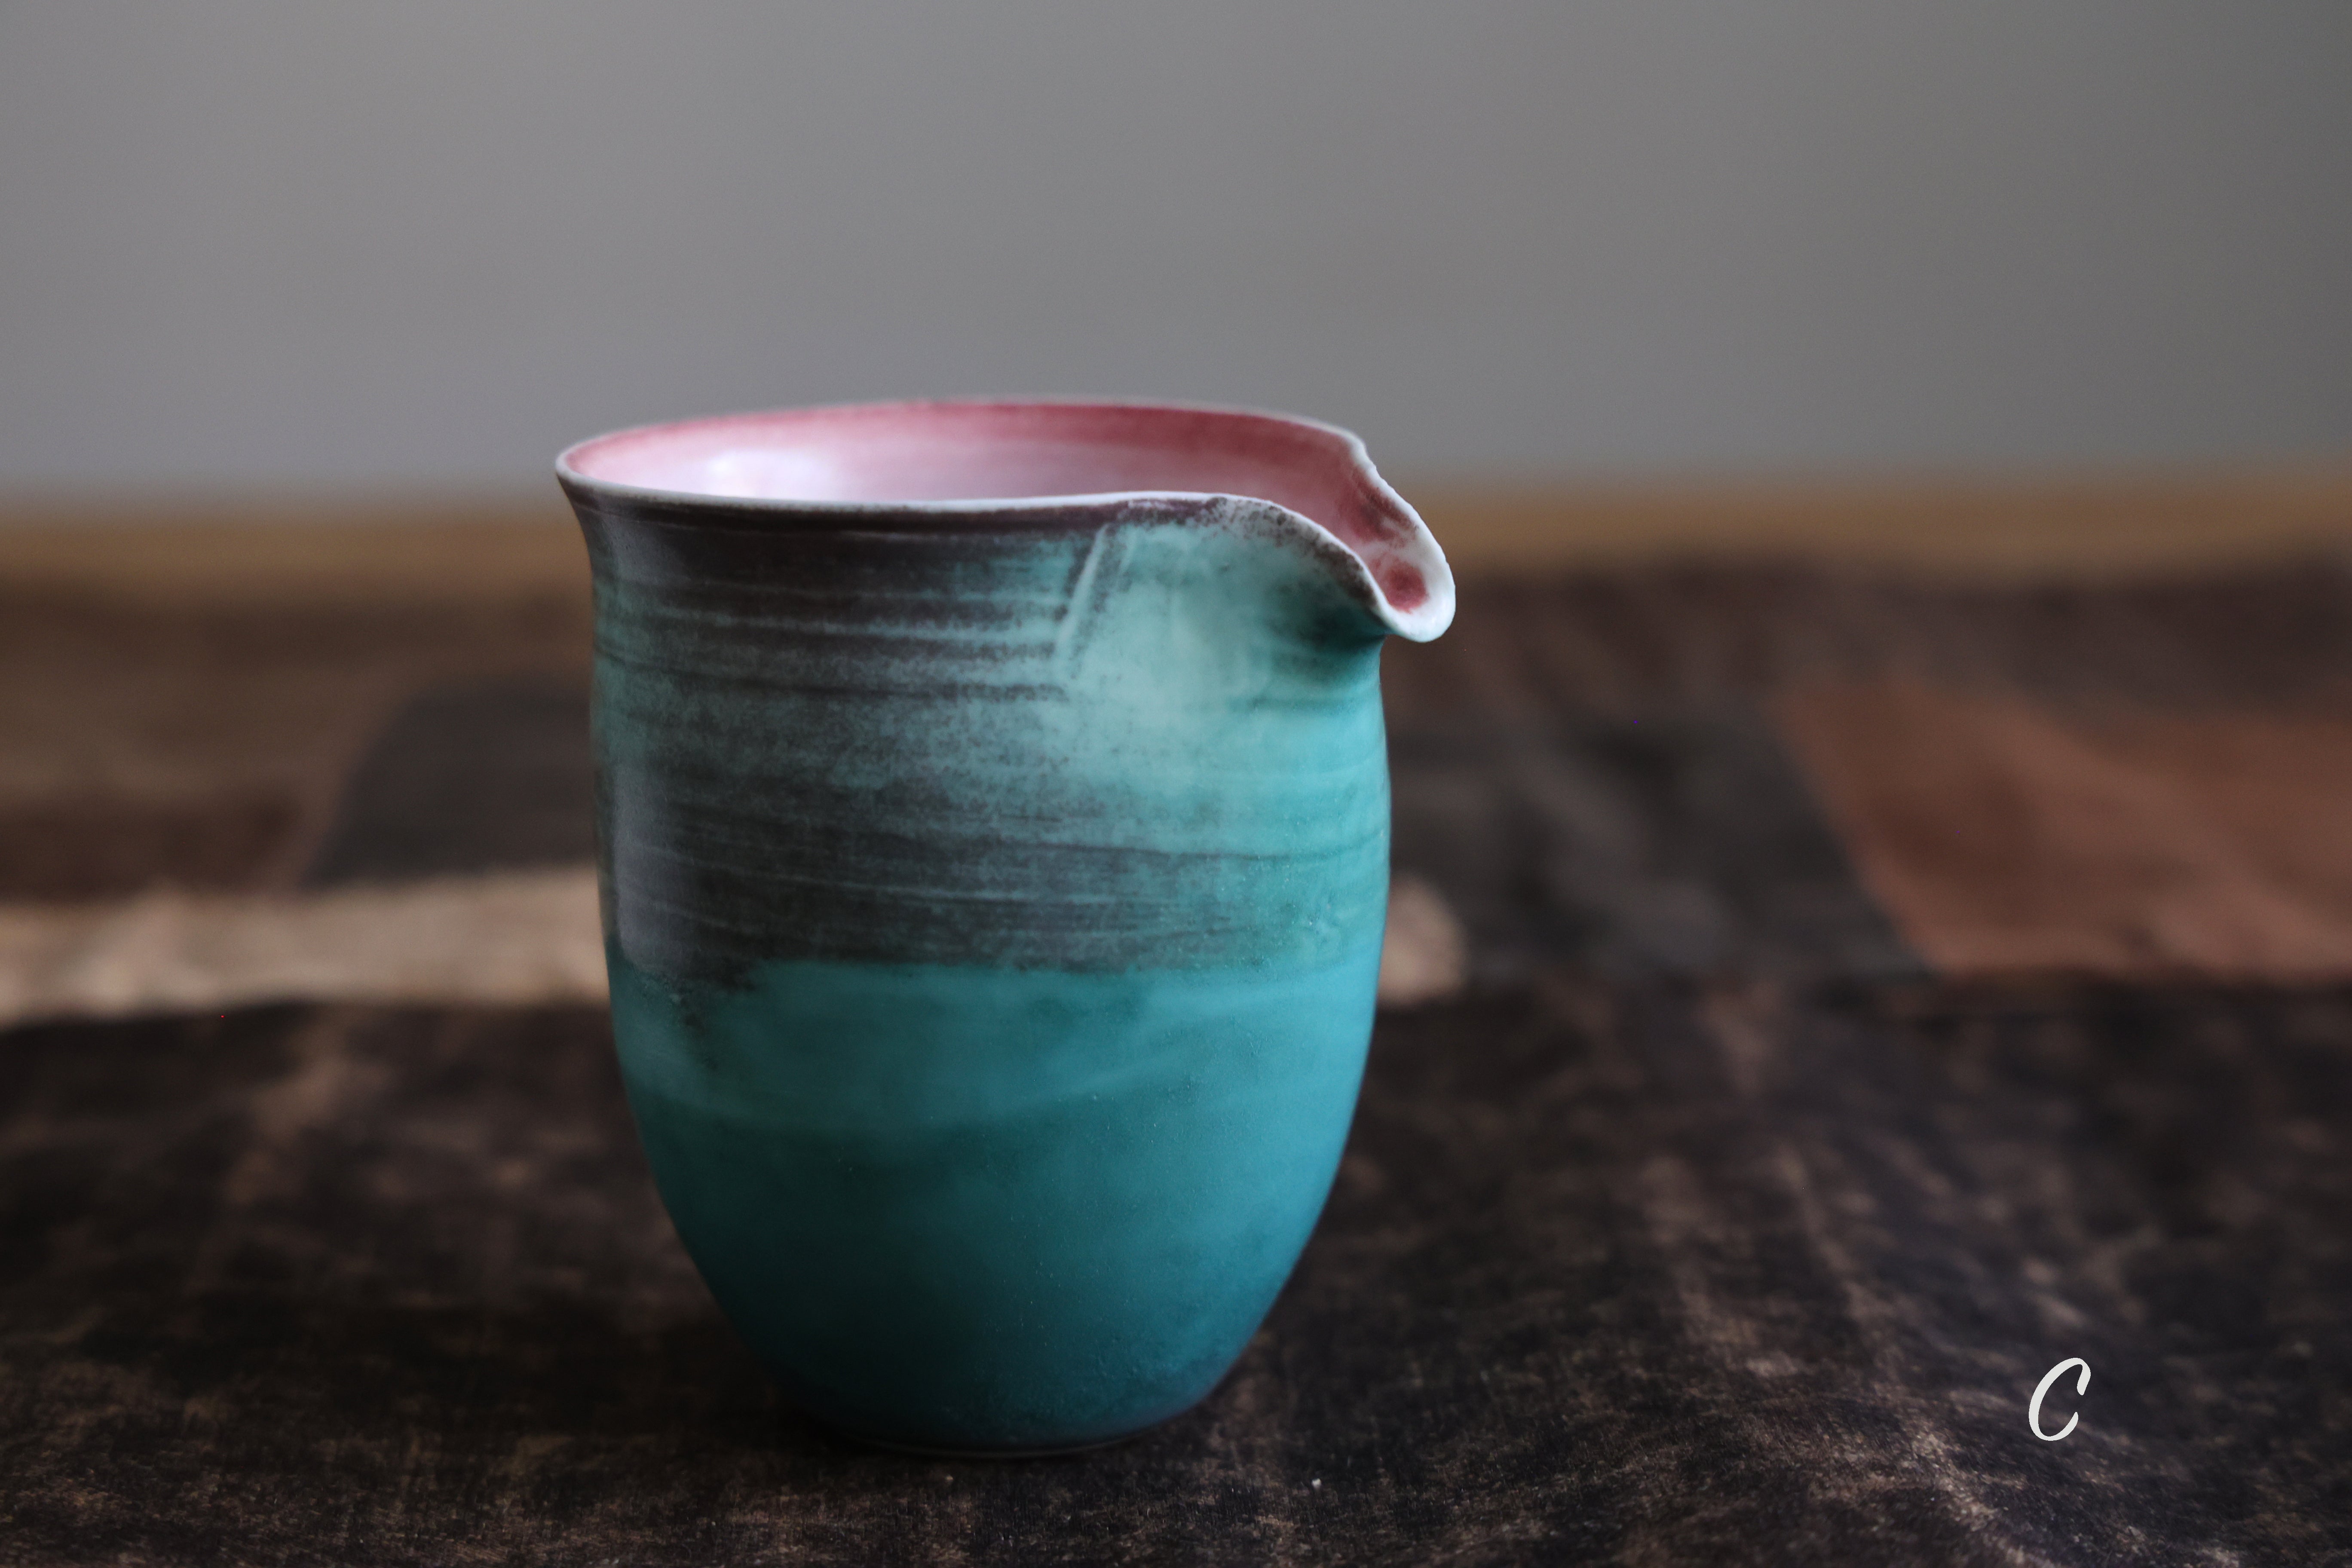 Blushing Turquoise Faircup